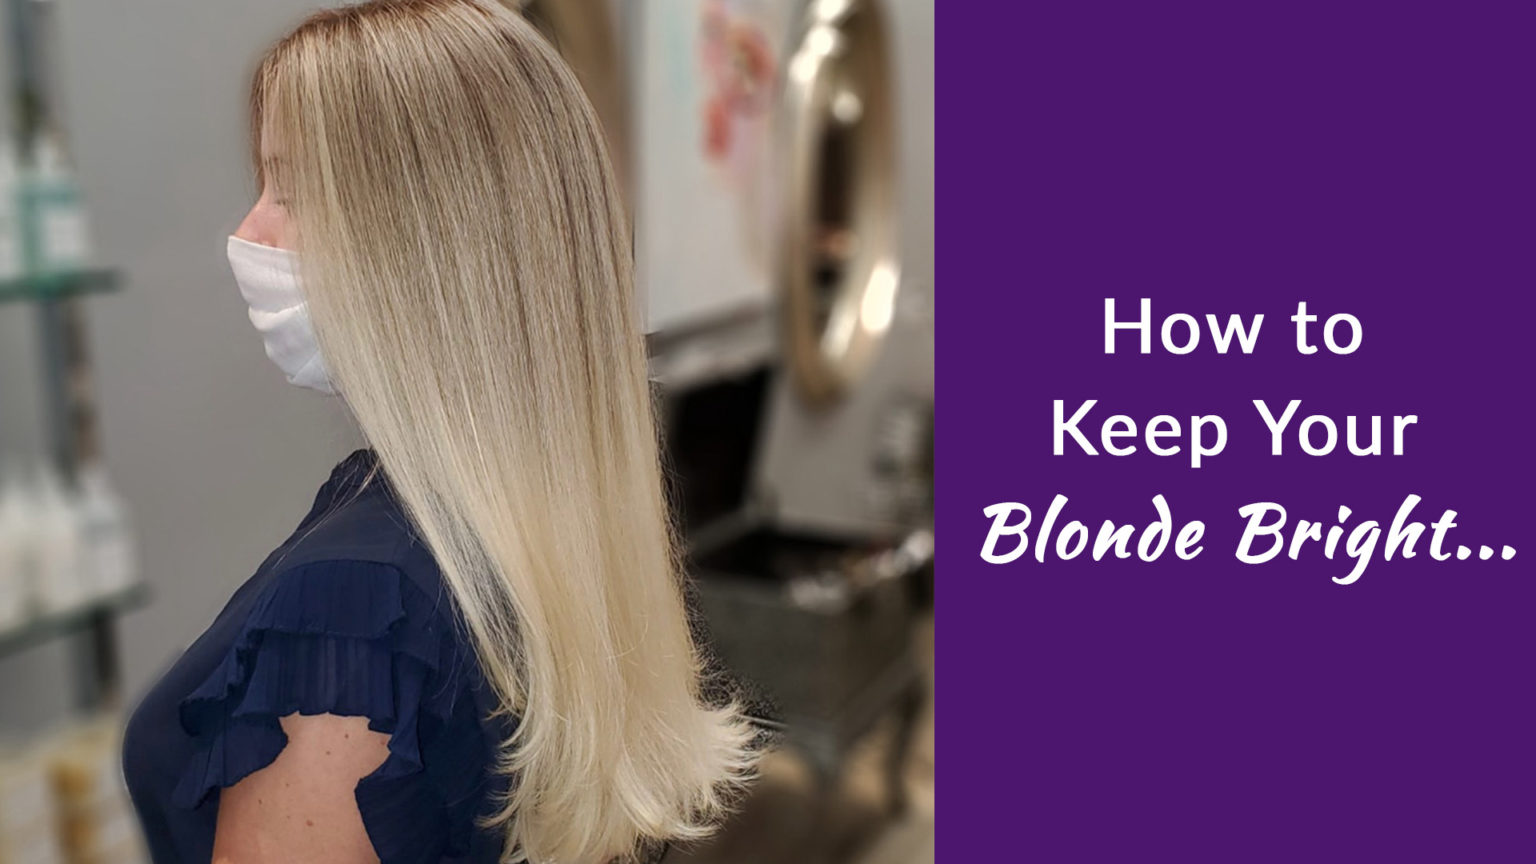 1. How to Achieve Pretty Bright Blonde Hair - wide 7